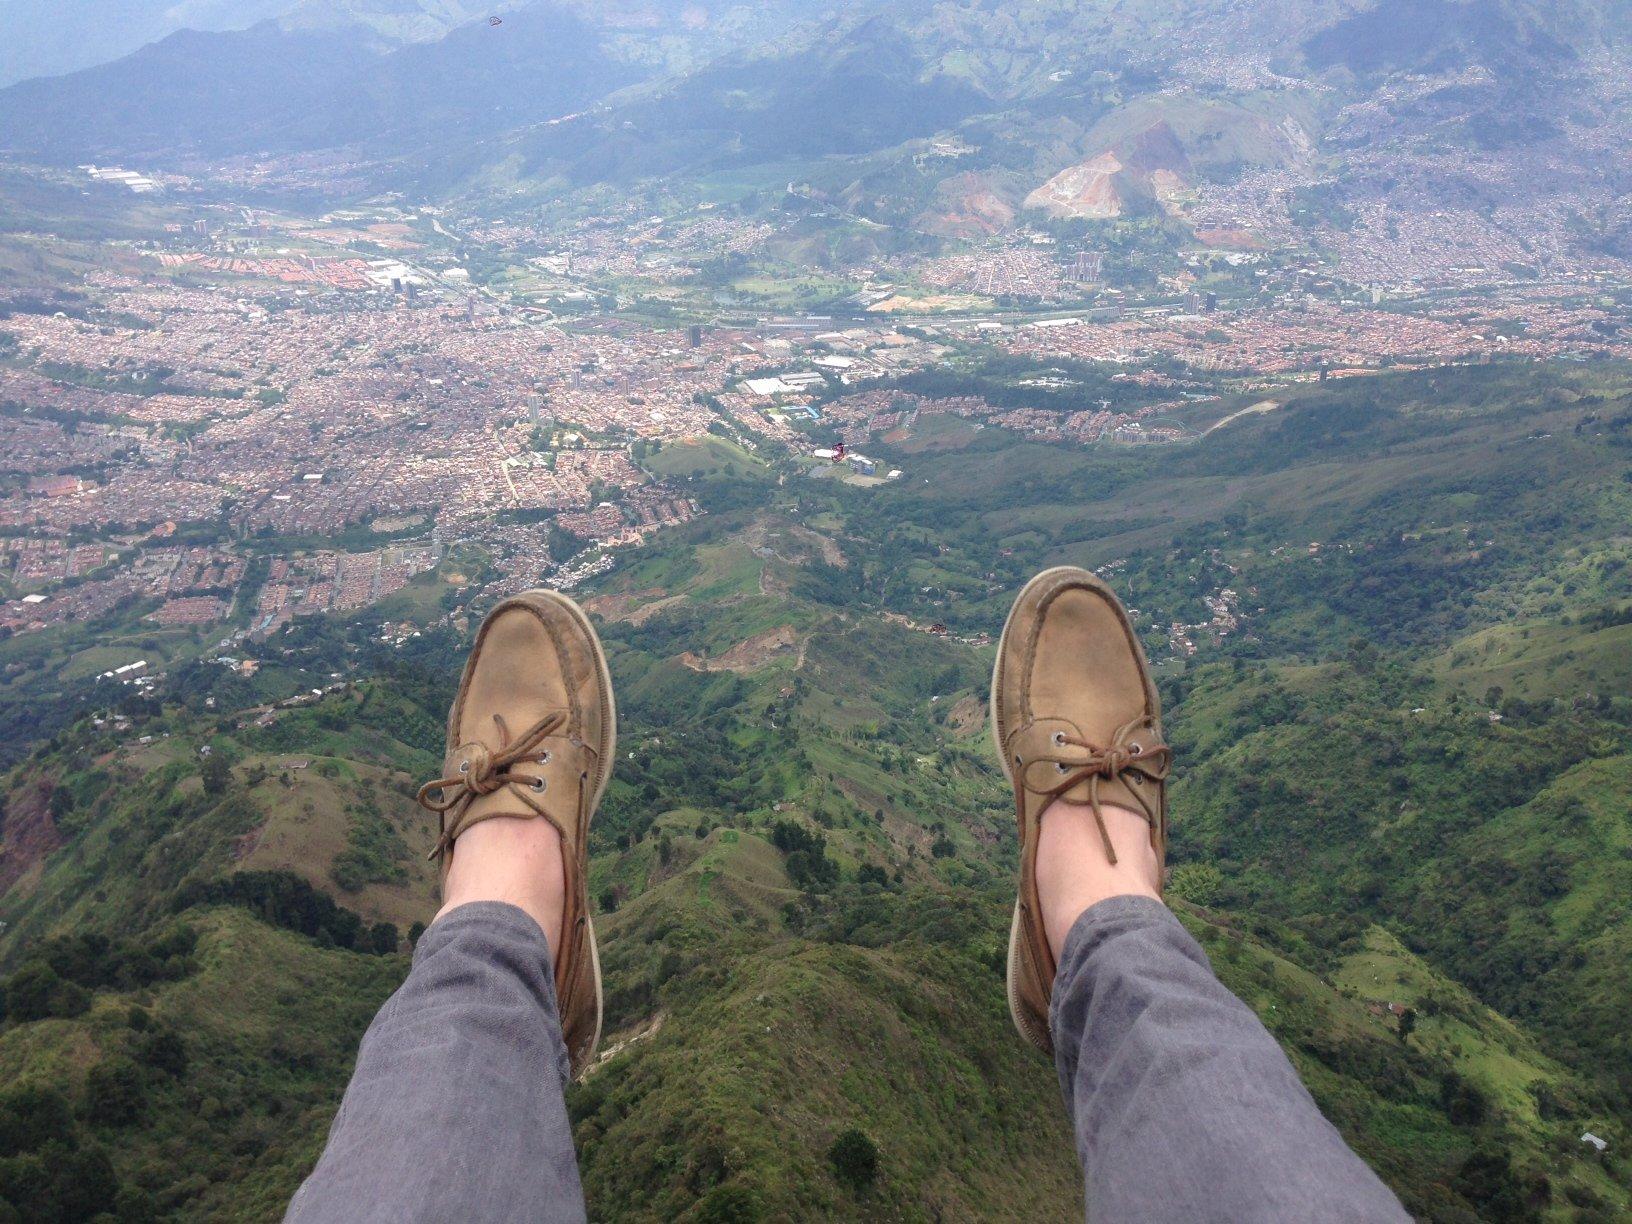 Henry Tucher’s view while paragliding in Colombia